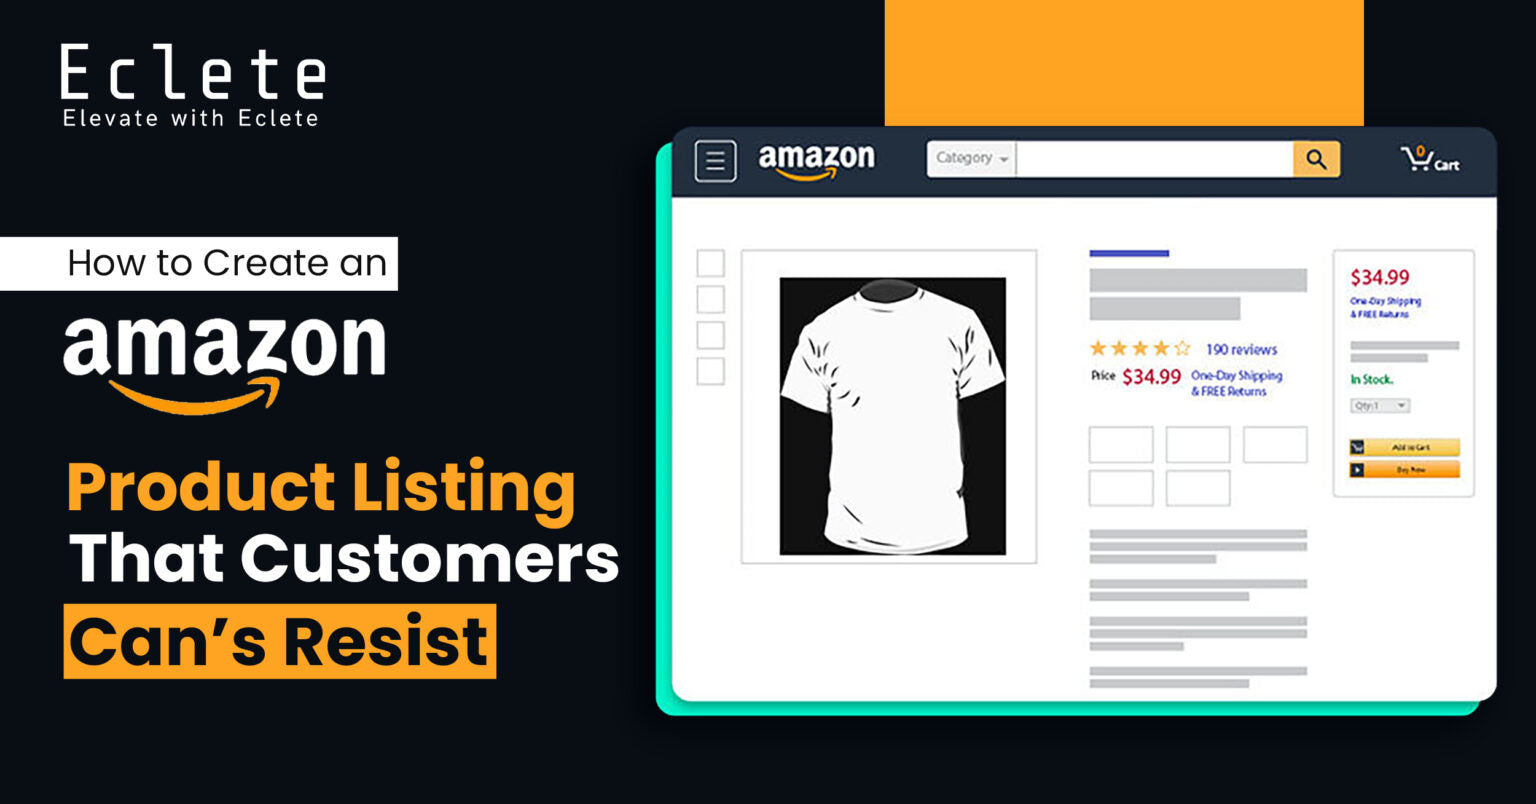 A step-by-step guide to Create a listing on Amazon seller central.